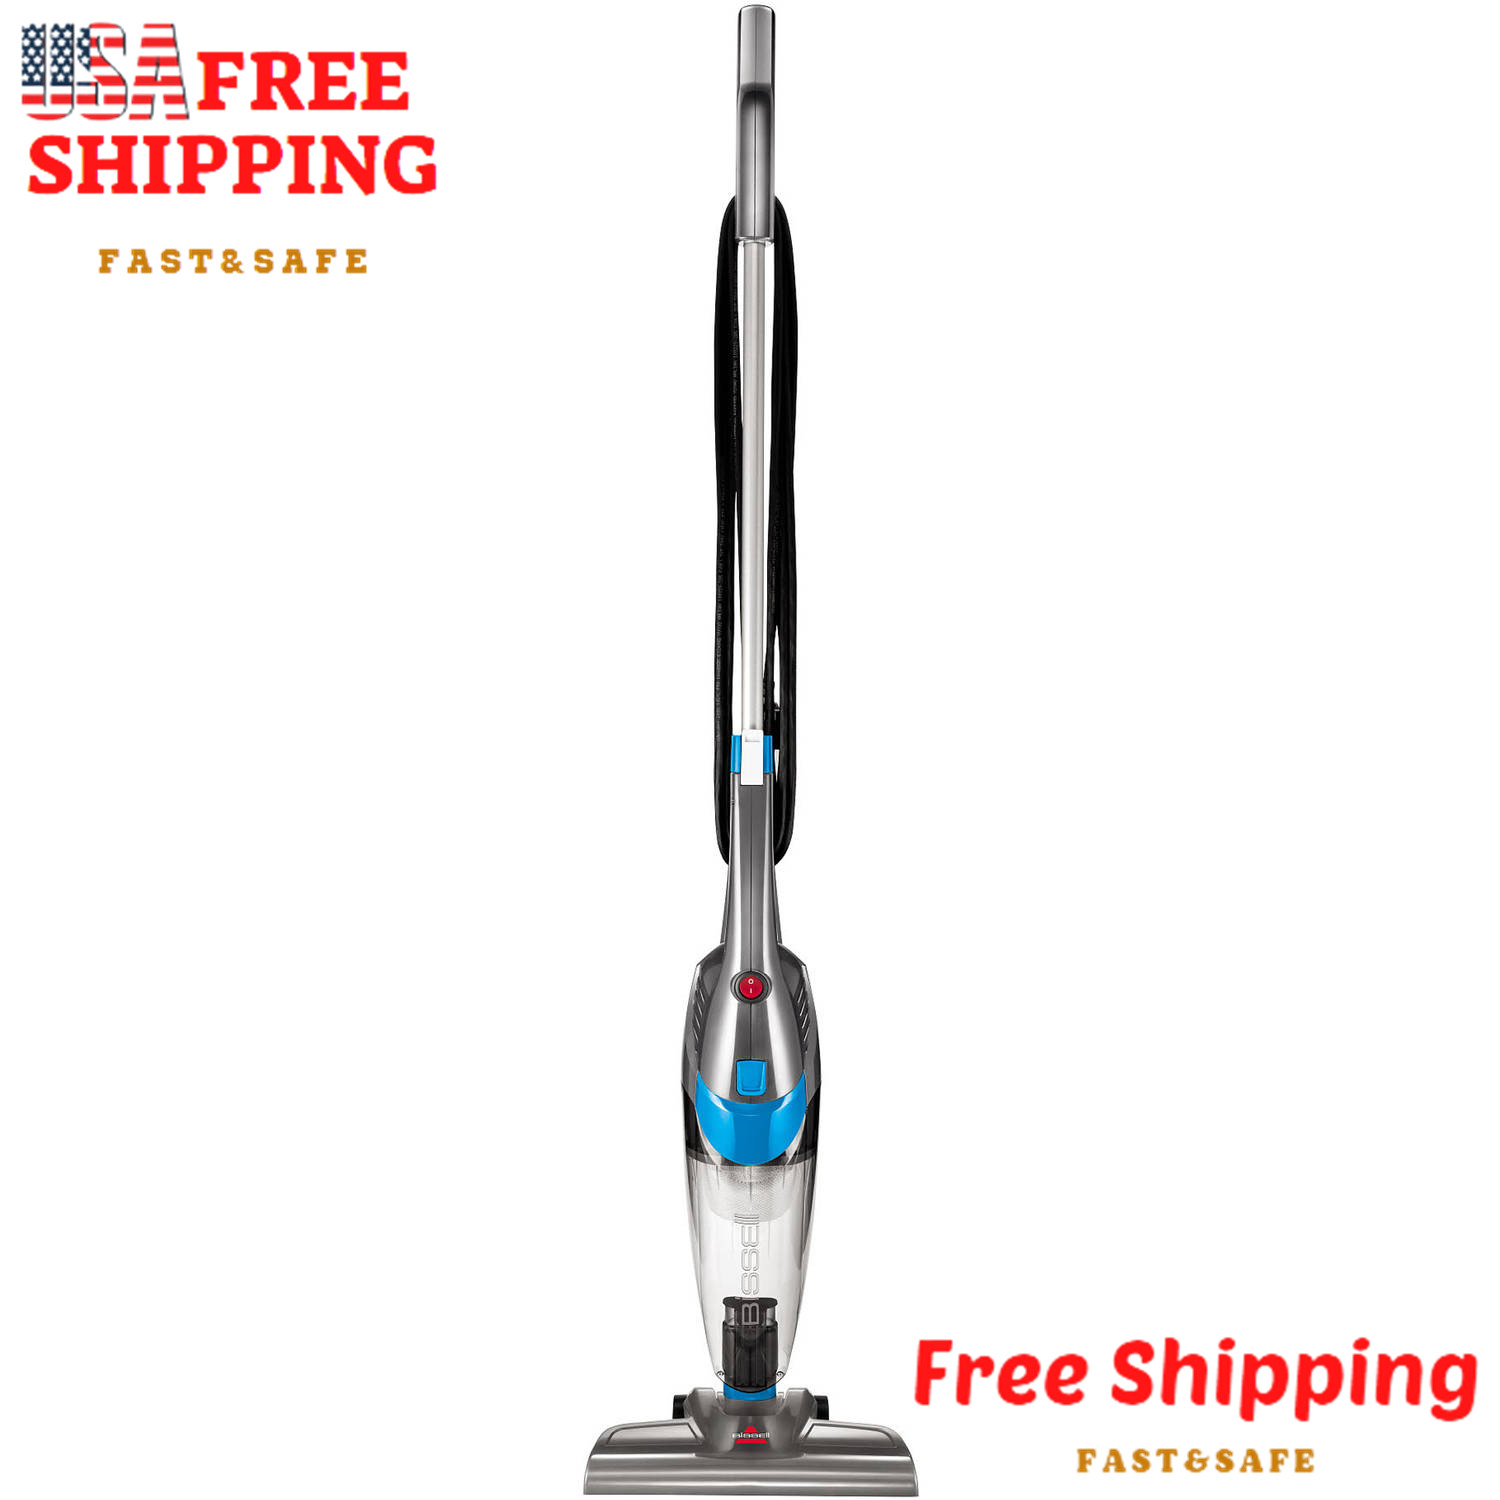 BISSELL 3-In-1 Lightweight Corded Stick Vacuum Cleaner,Free Shipping,Home,Garden